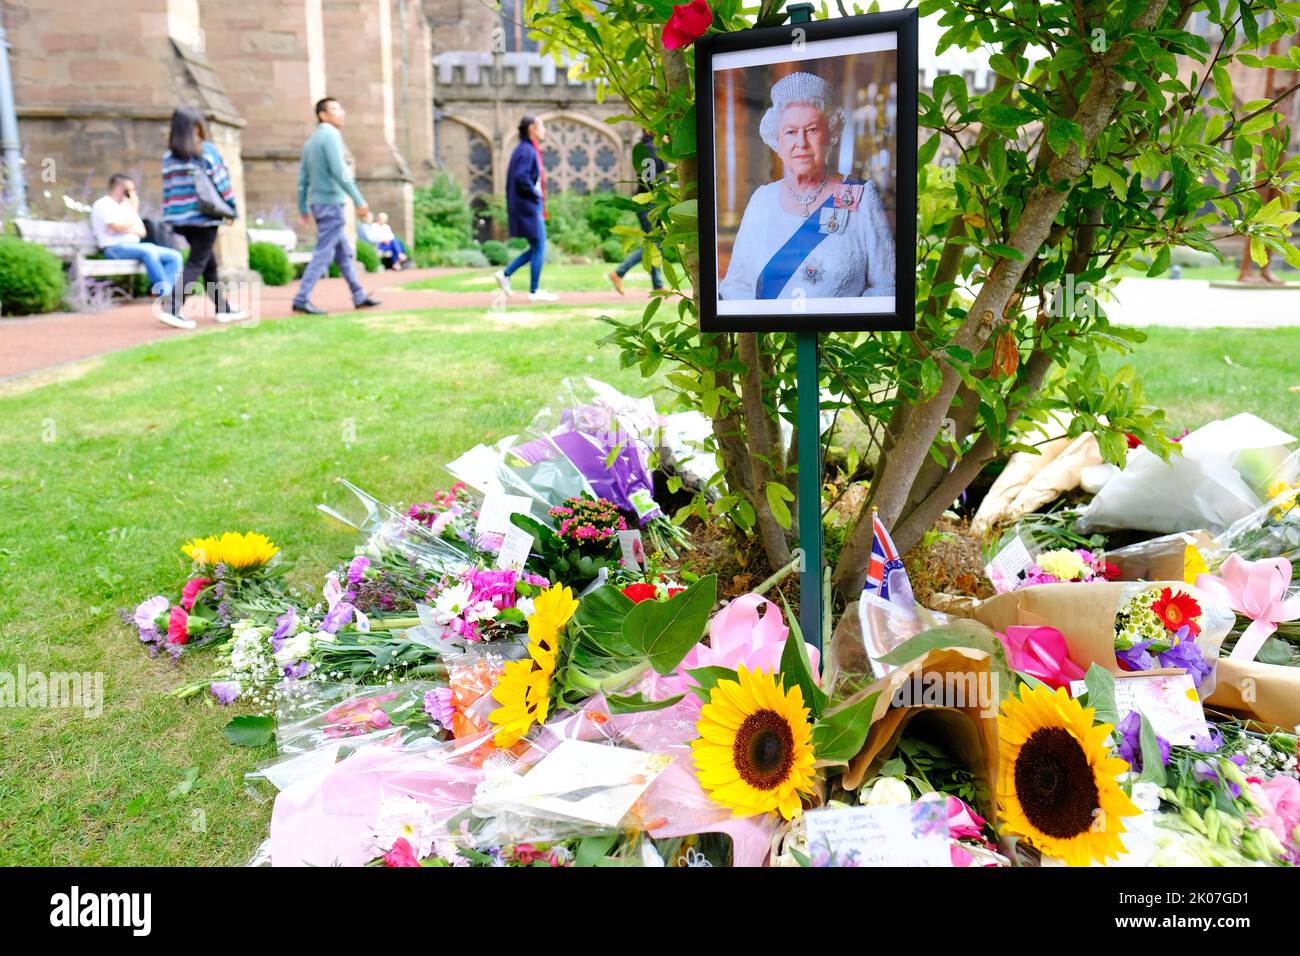 Hereford, Herefordshire, UK - Saturday 10th September 2022 - Bouquets of flowers lay beside a portrait of Queen Elizabeth II in the grounds of Hereford Cathedral as Britain mourns the death of the Monarch. Photo Steven May / Alamy Live News Stock Photo